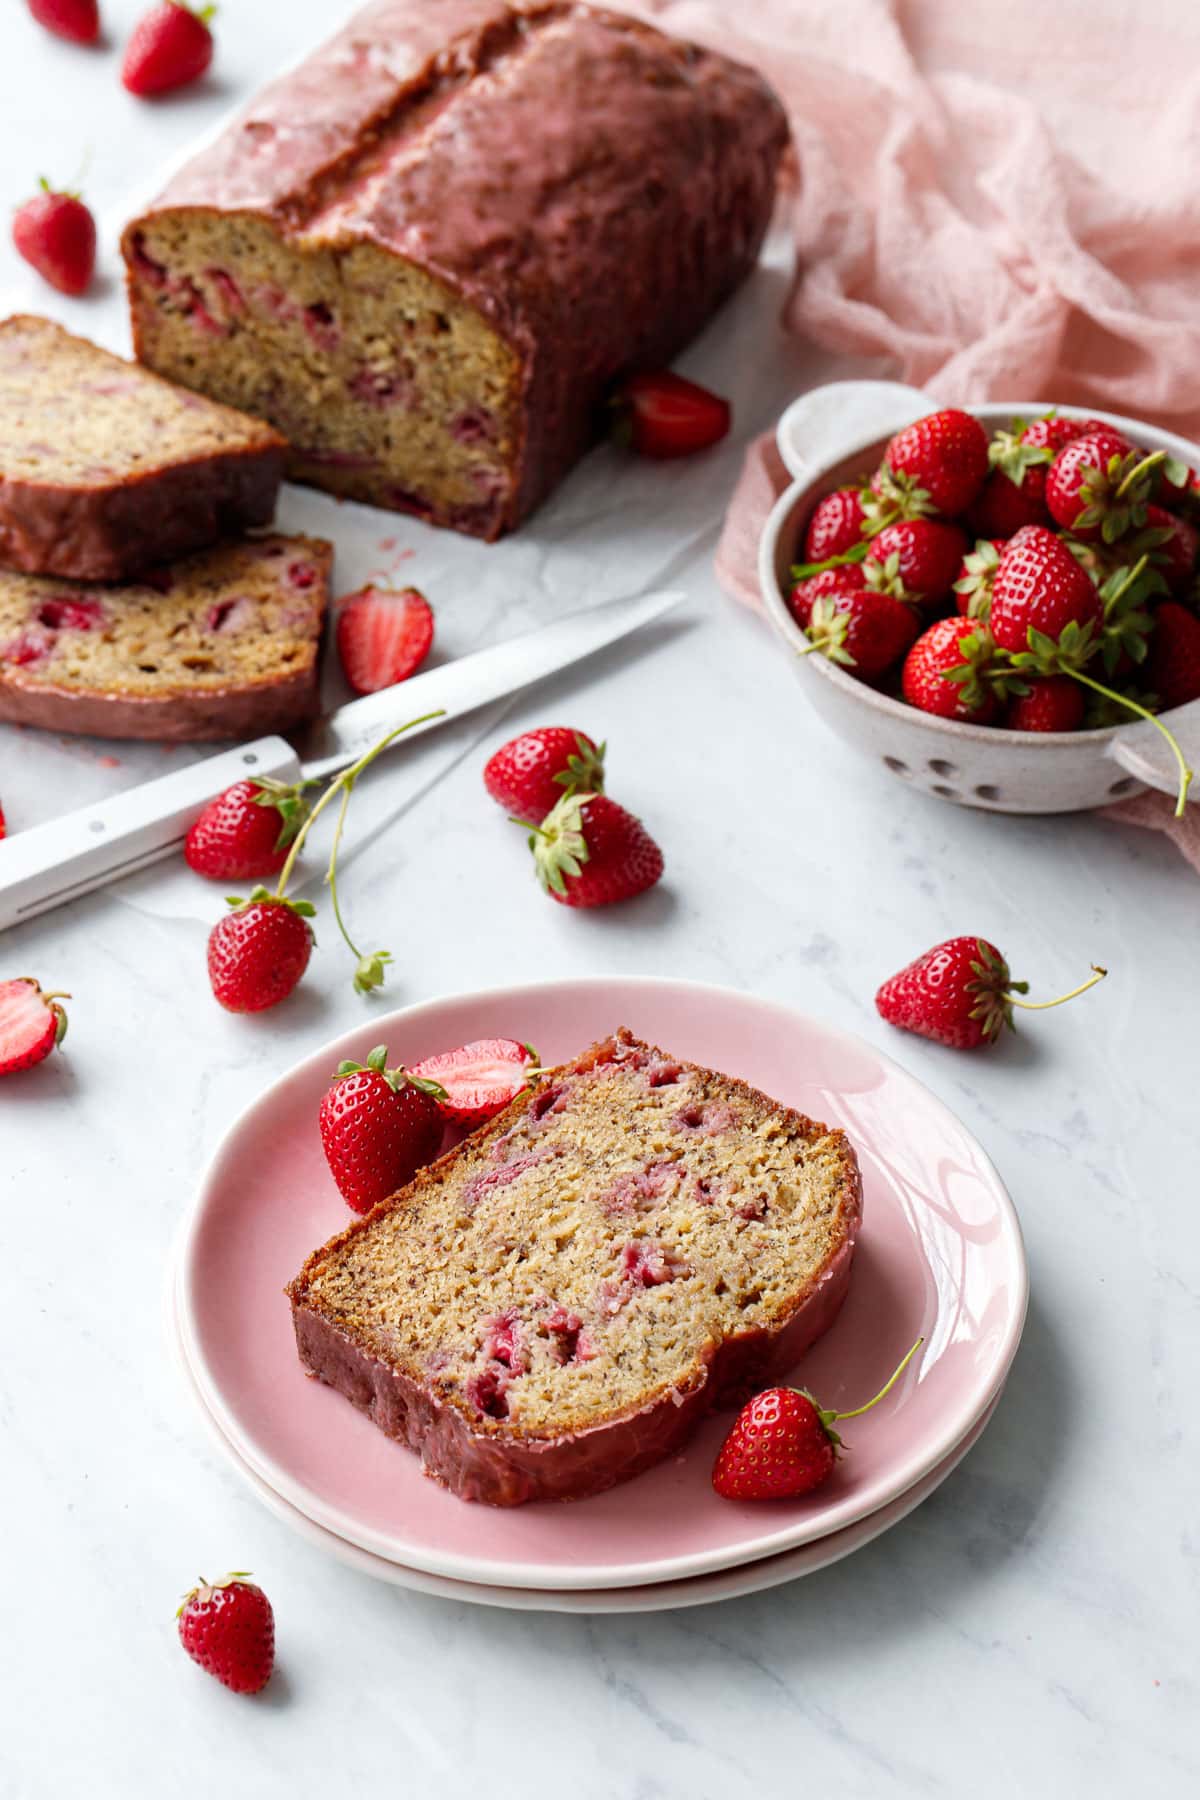 Slice of Strawberry Banana Bread on a pink plate, with the full loaf and slices in the background with a bowl of fresh strawberries and a knife.